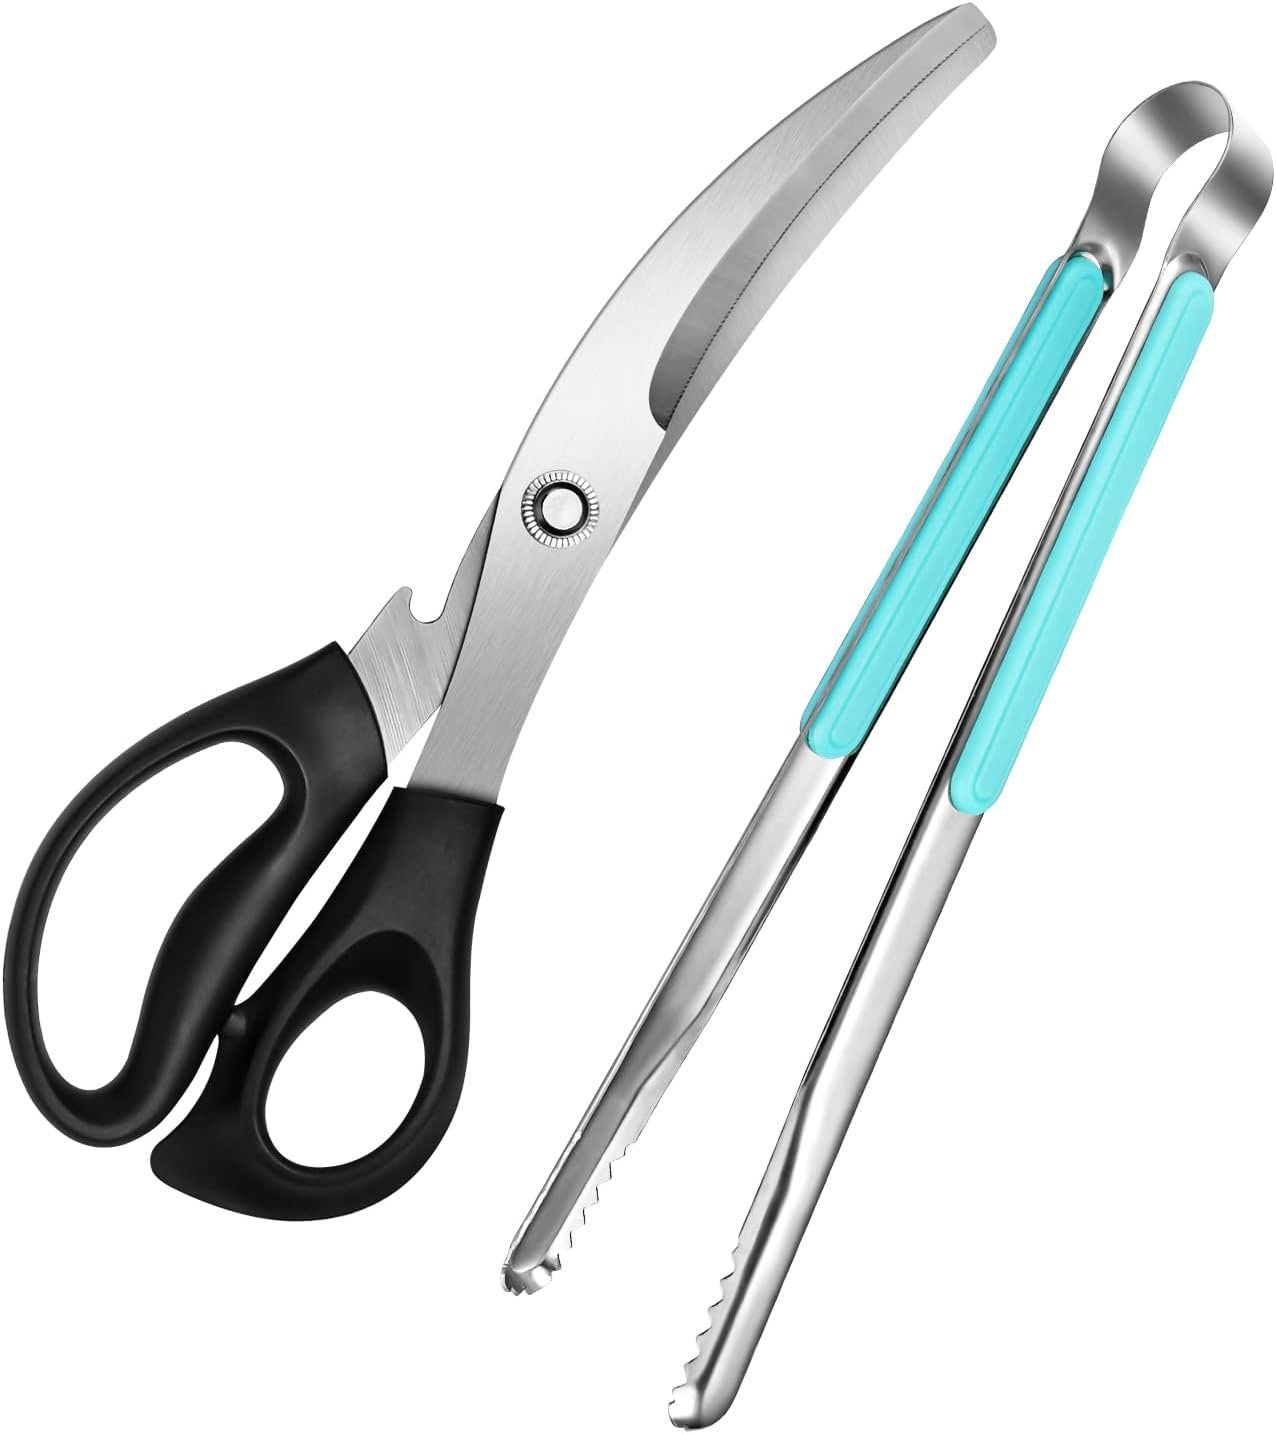 GUMIFOTNE Kitchen Scissors for Cutting Meat,vegetables,etc.Korean Barbecue Shear and tongs set,BBQ scissors and clip,Ergonomic Stainless Steel Multipurpose Kitchen Scissors and tongs set.